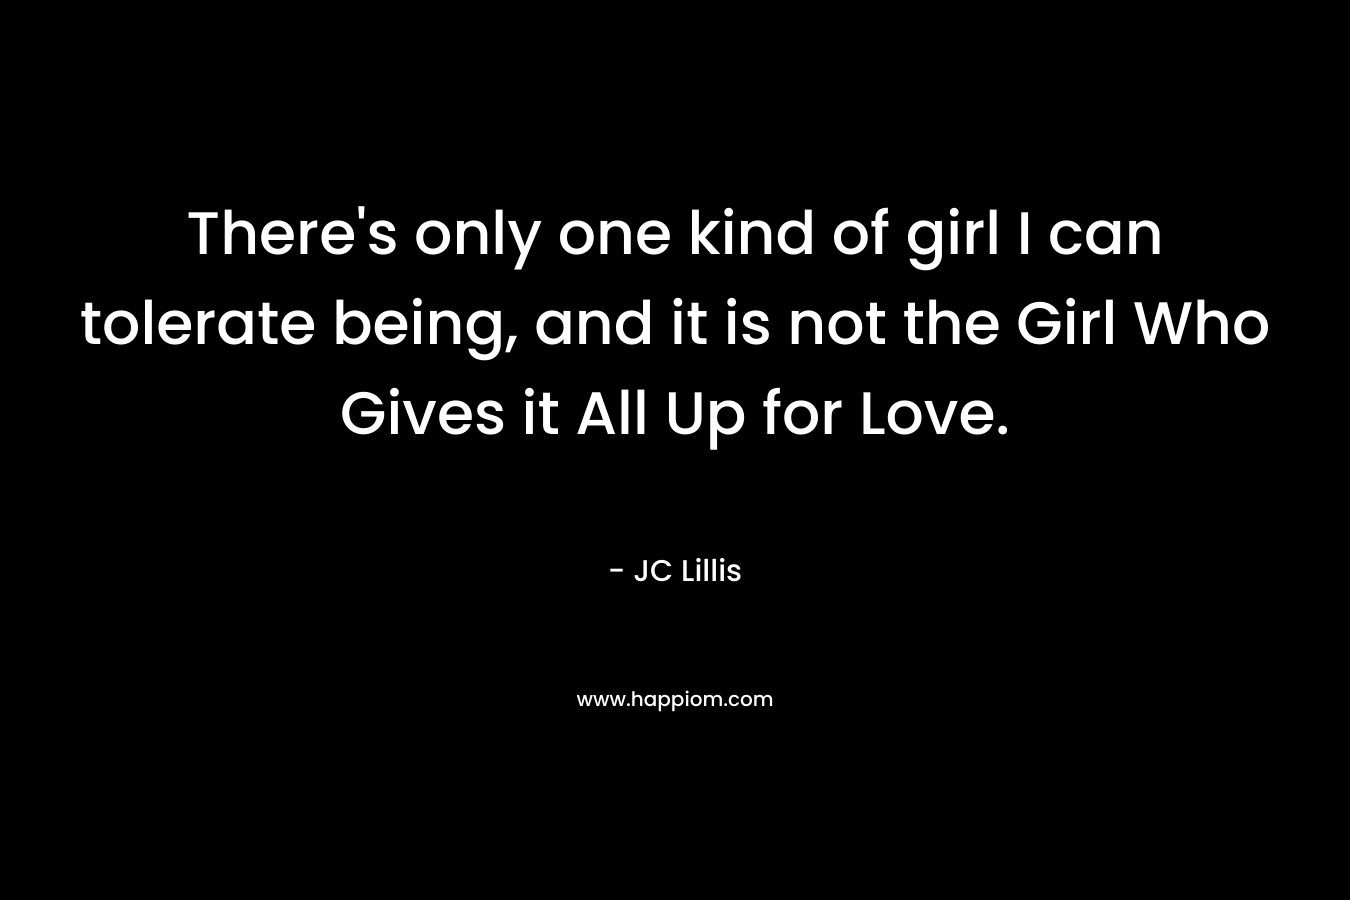 There's only one kind of girl I can tolerate being, and it is not the Girl Who Gives it All Up for Love.